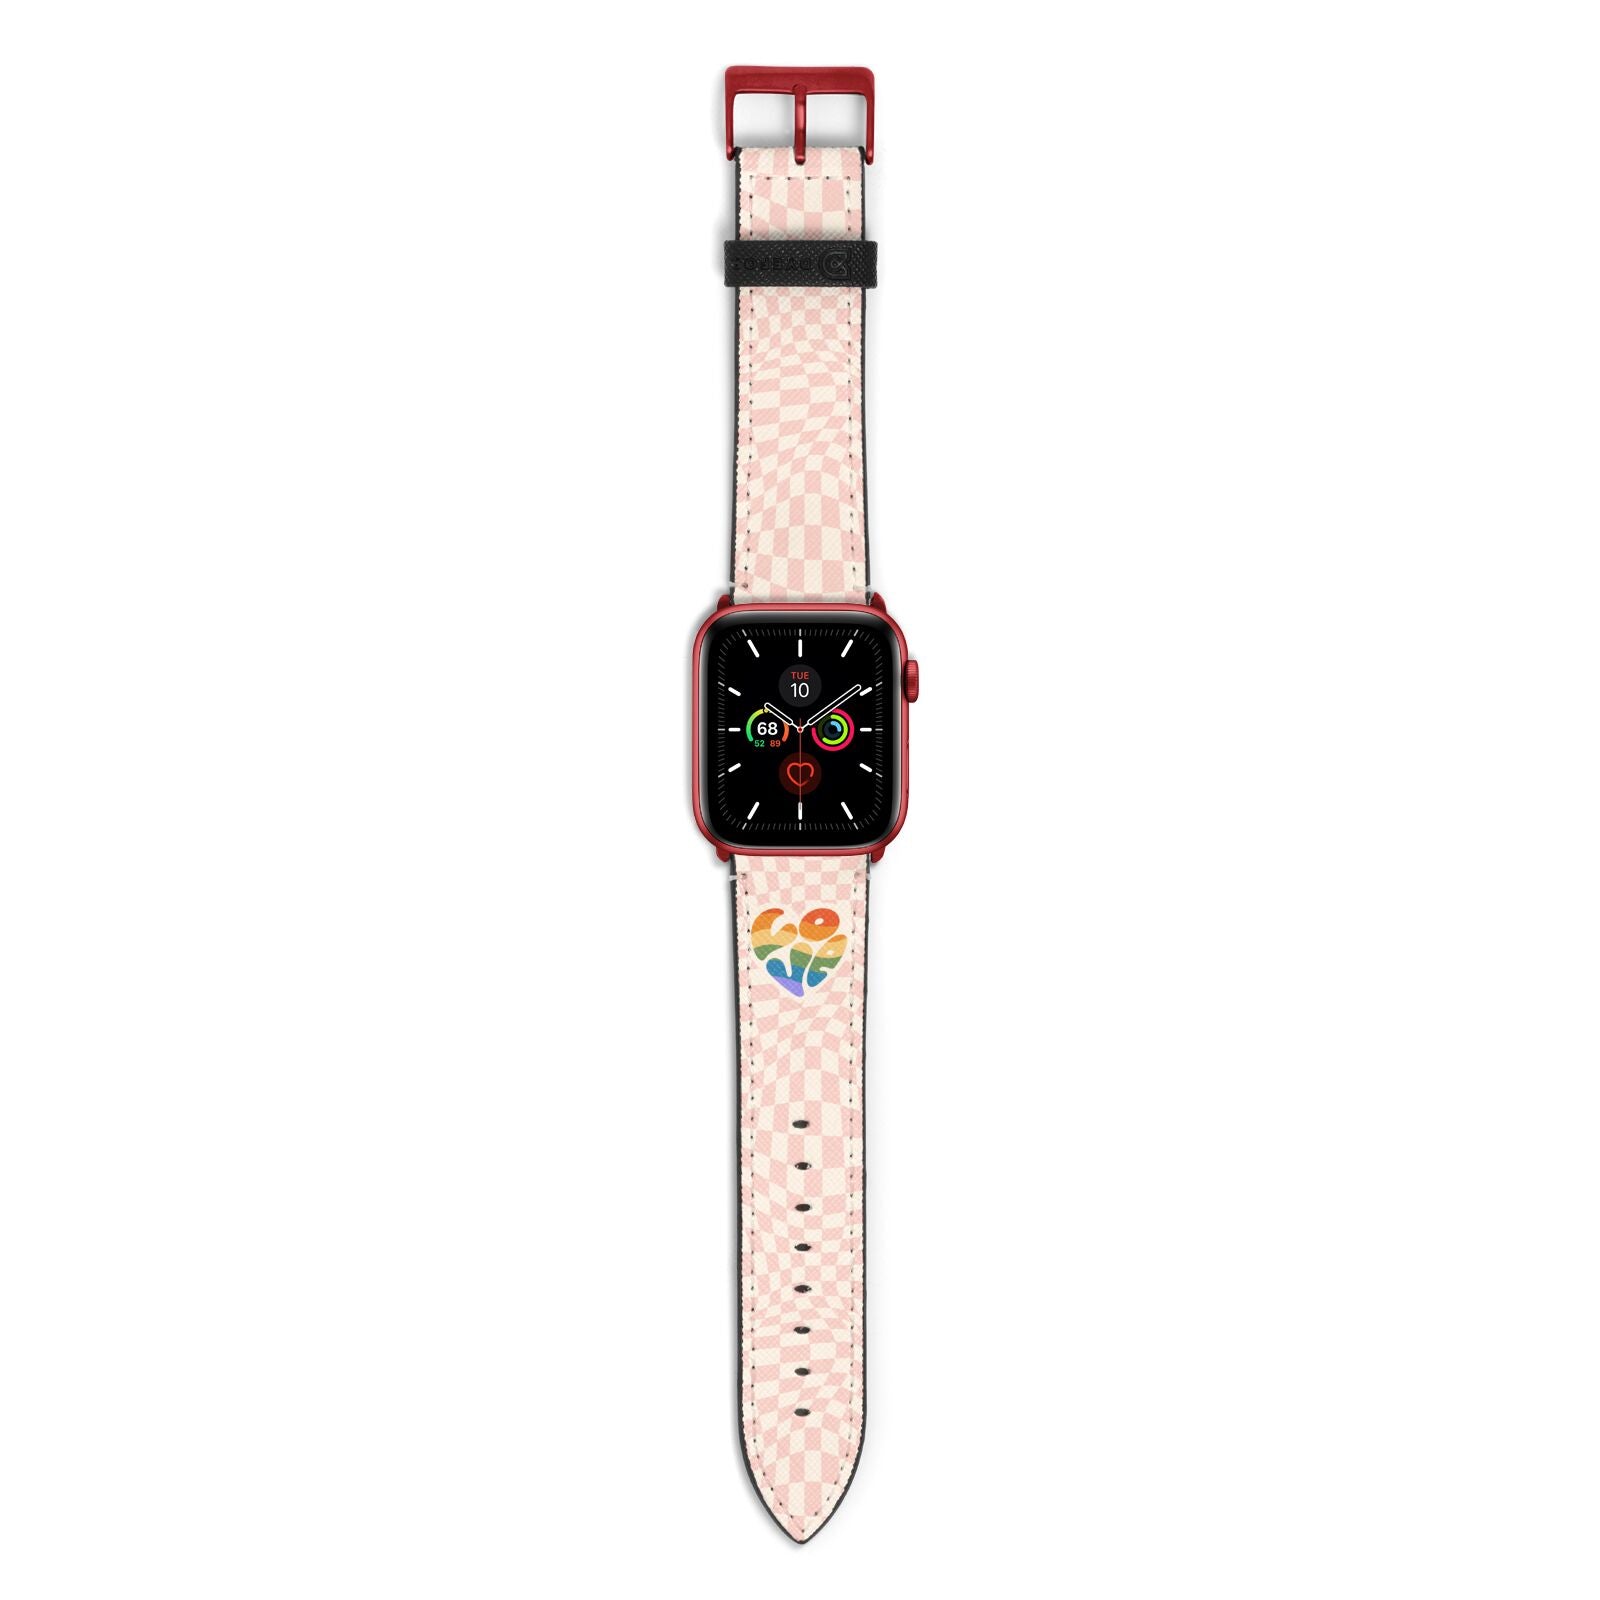 Pride Apple Watch Strap with Red Hardware